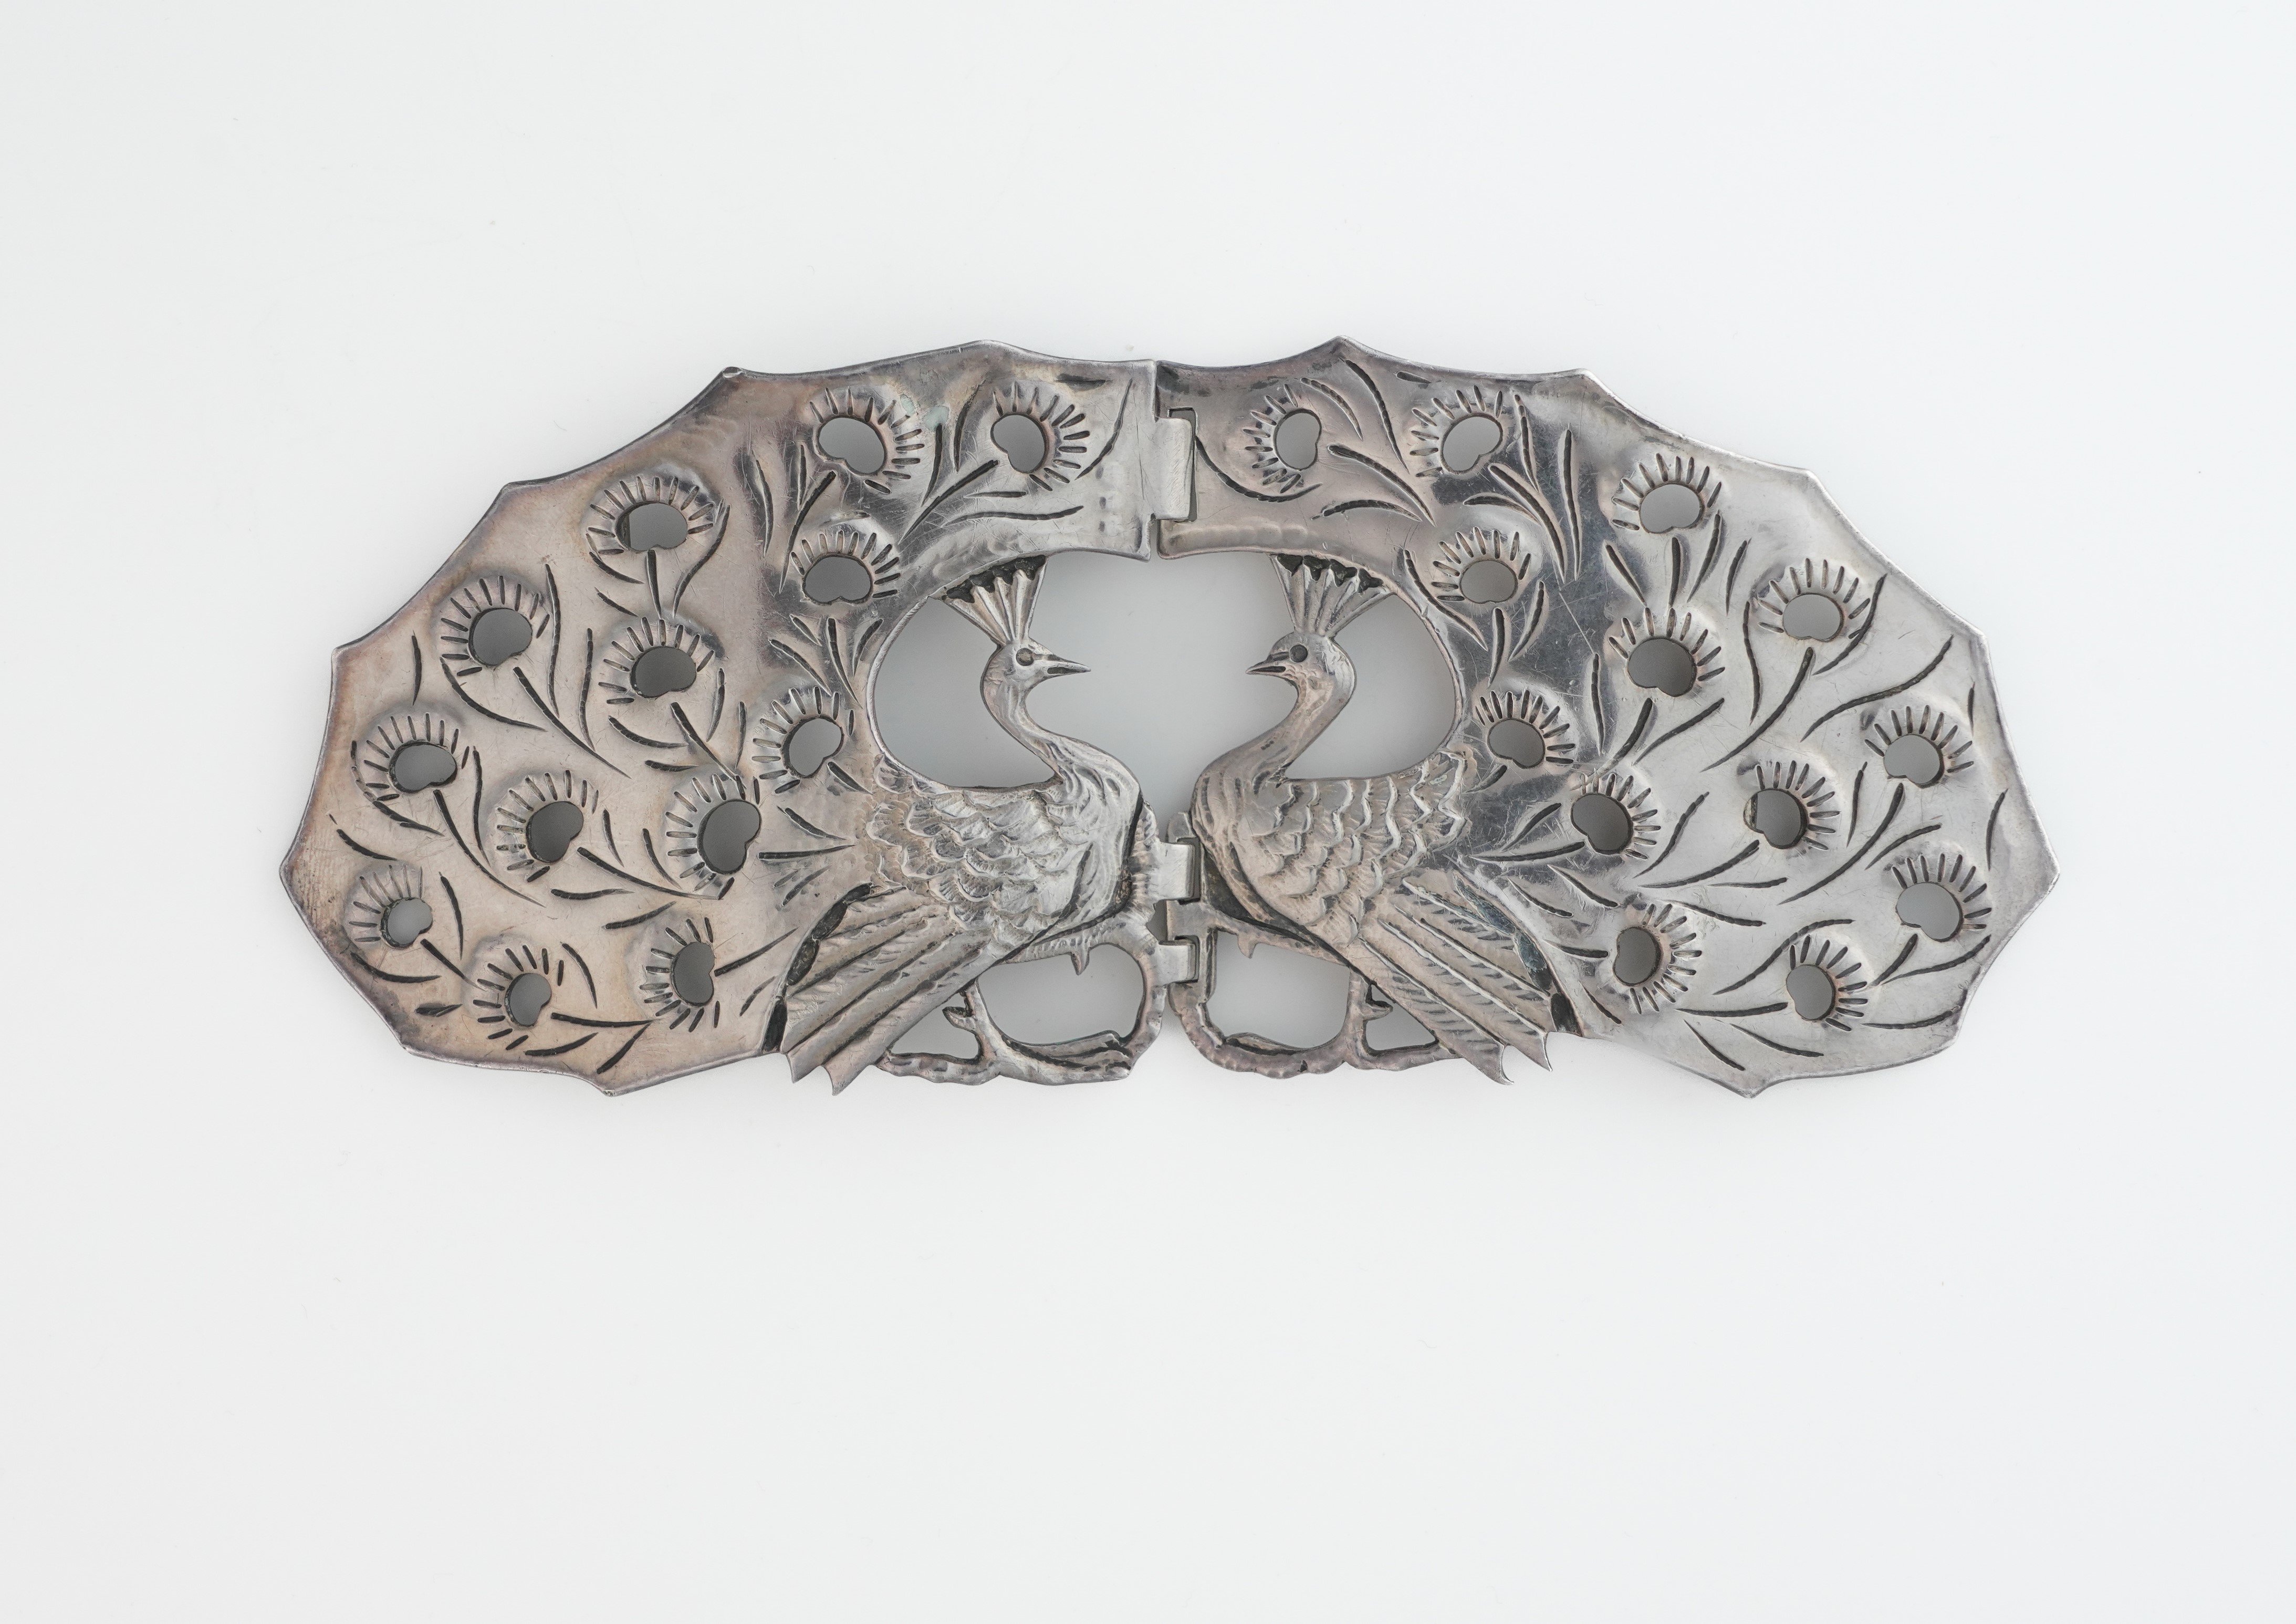 A LATE VICTORIAN SILVER TWO PIECE WAISTBELT BUCKLE